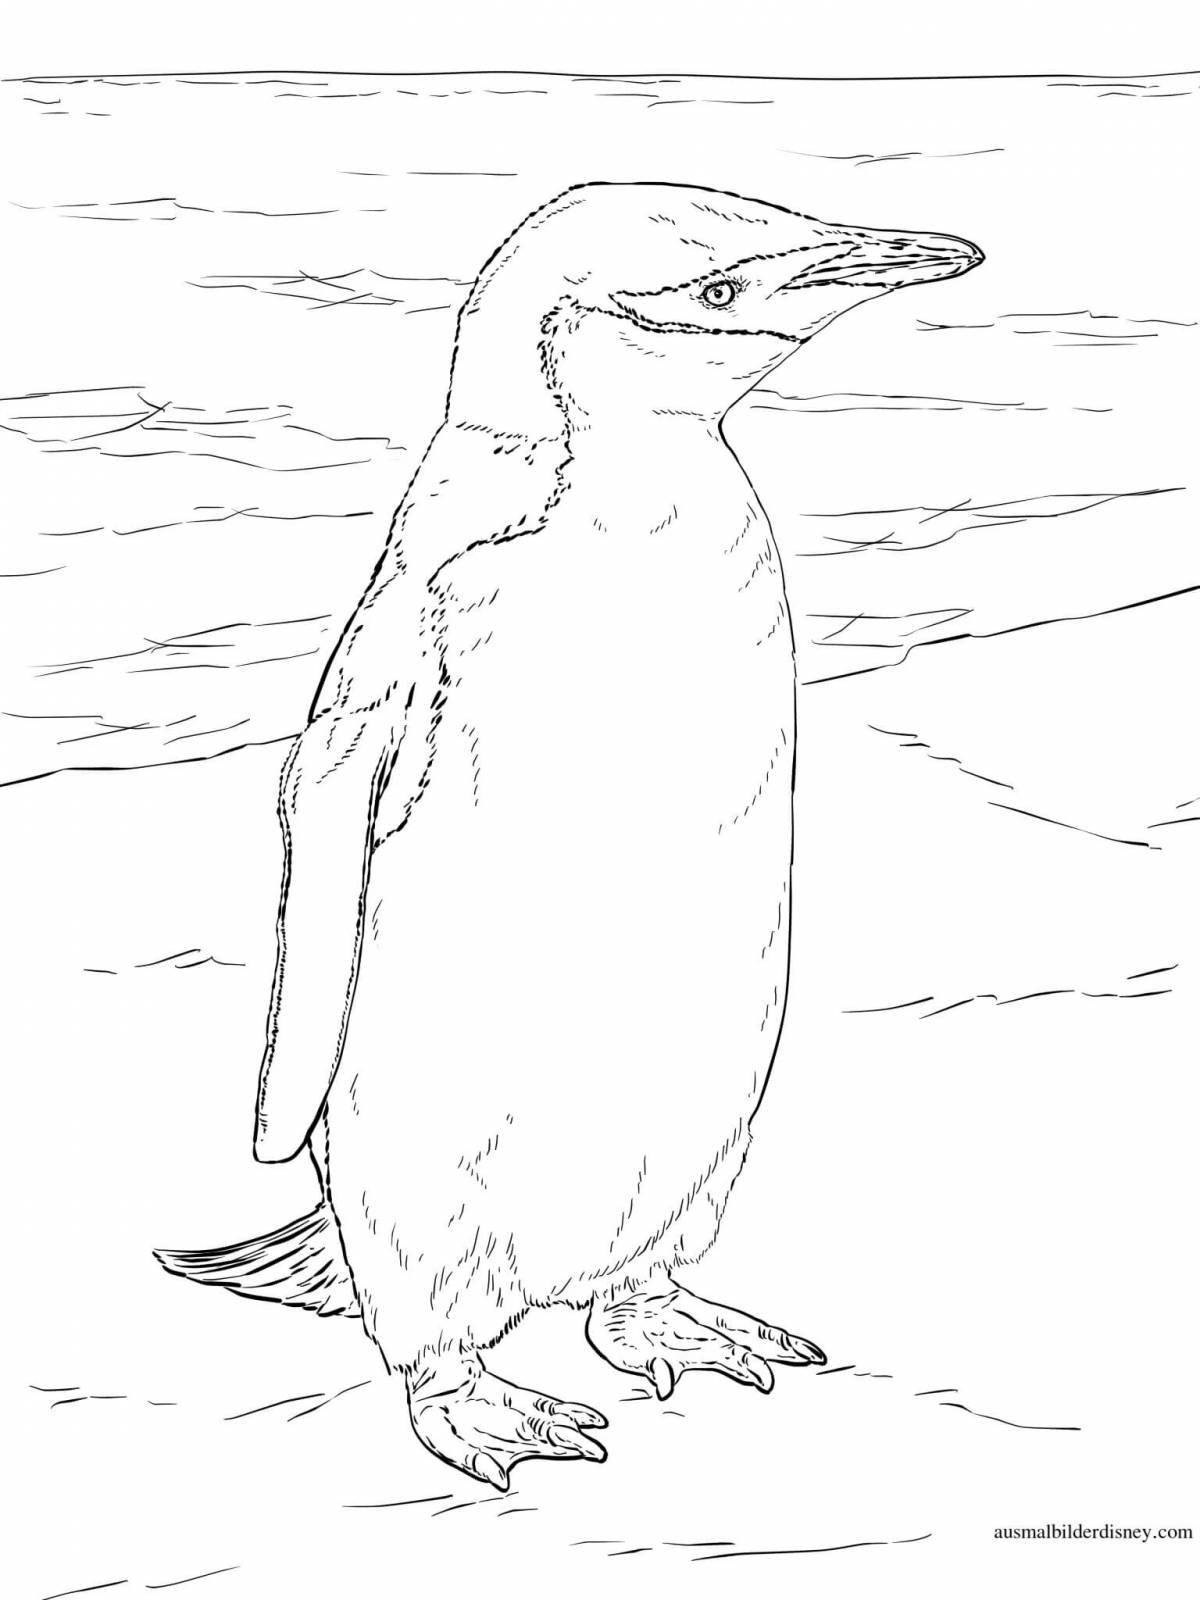 Sweet antarctica coloring book for kids 6-7 years old